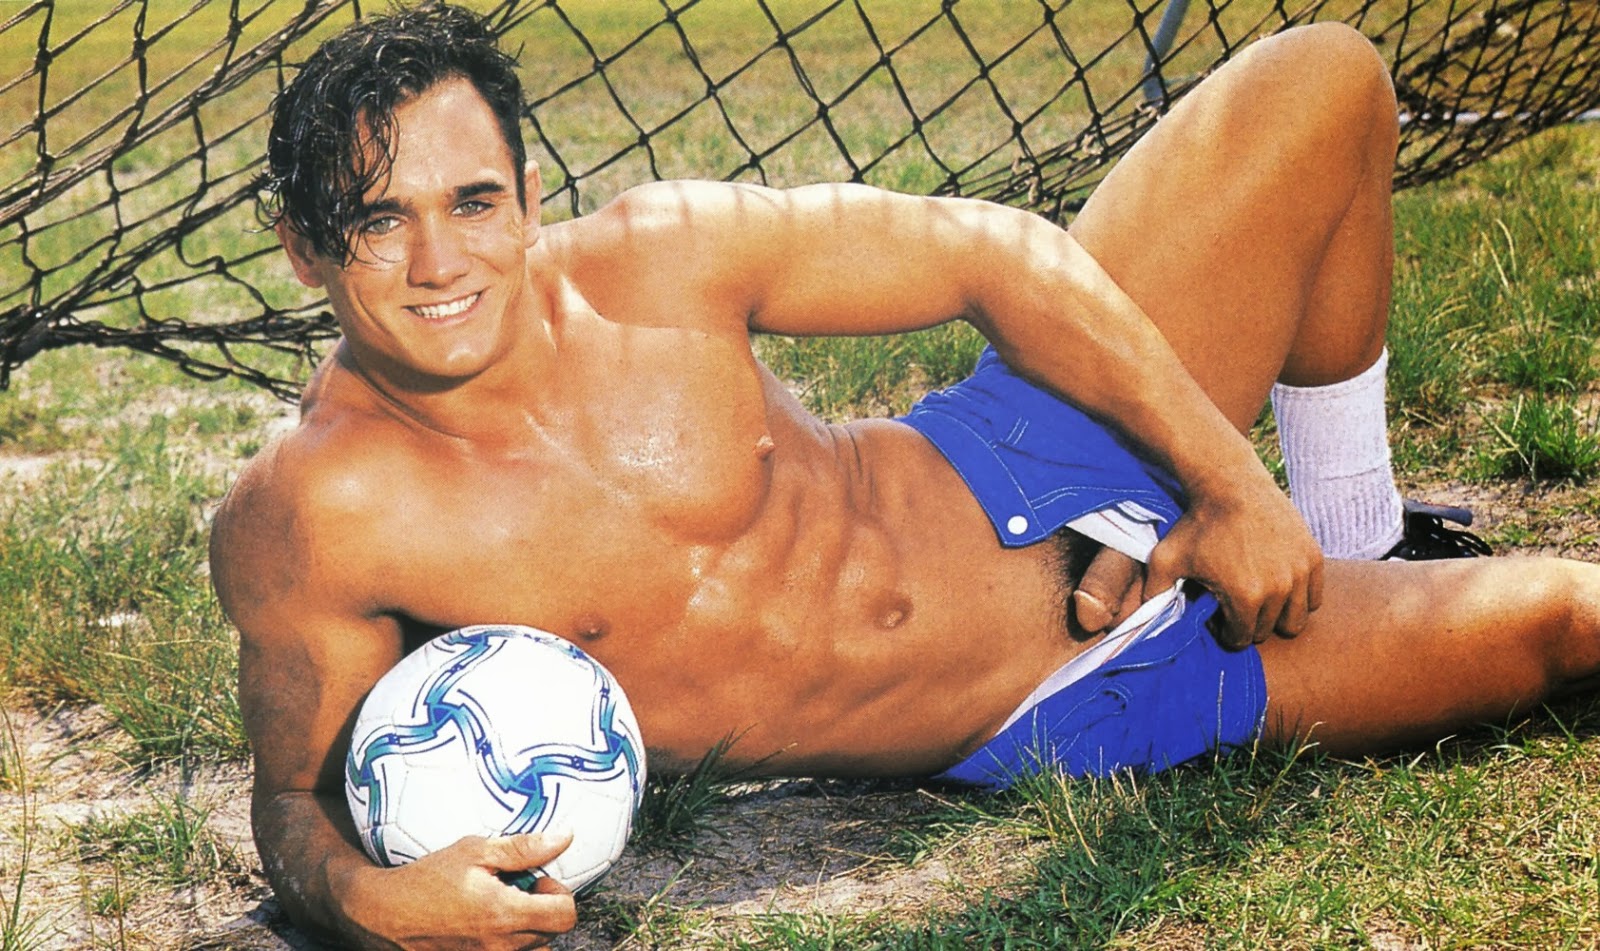 Eric Reins - Playgirl Special 93 - Hot Young Hunks 5 Magazine - 1999.